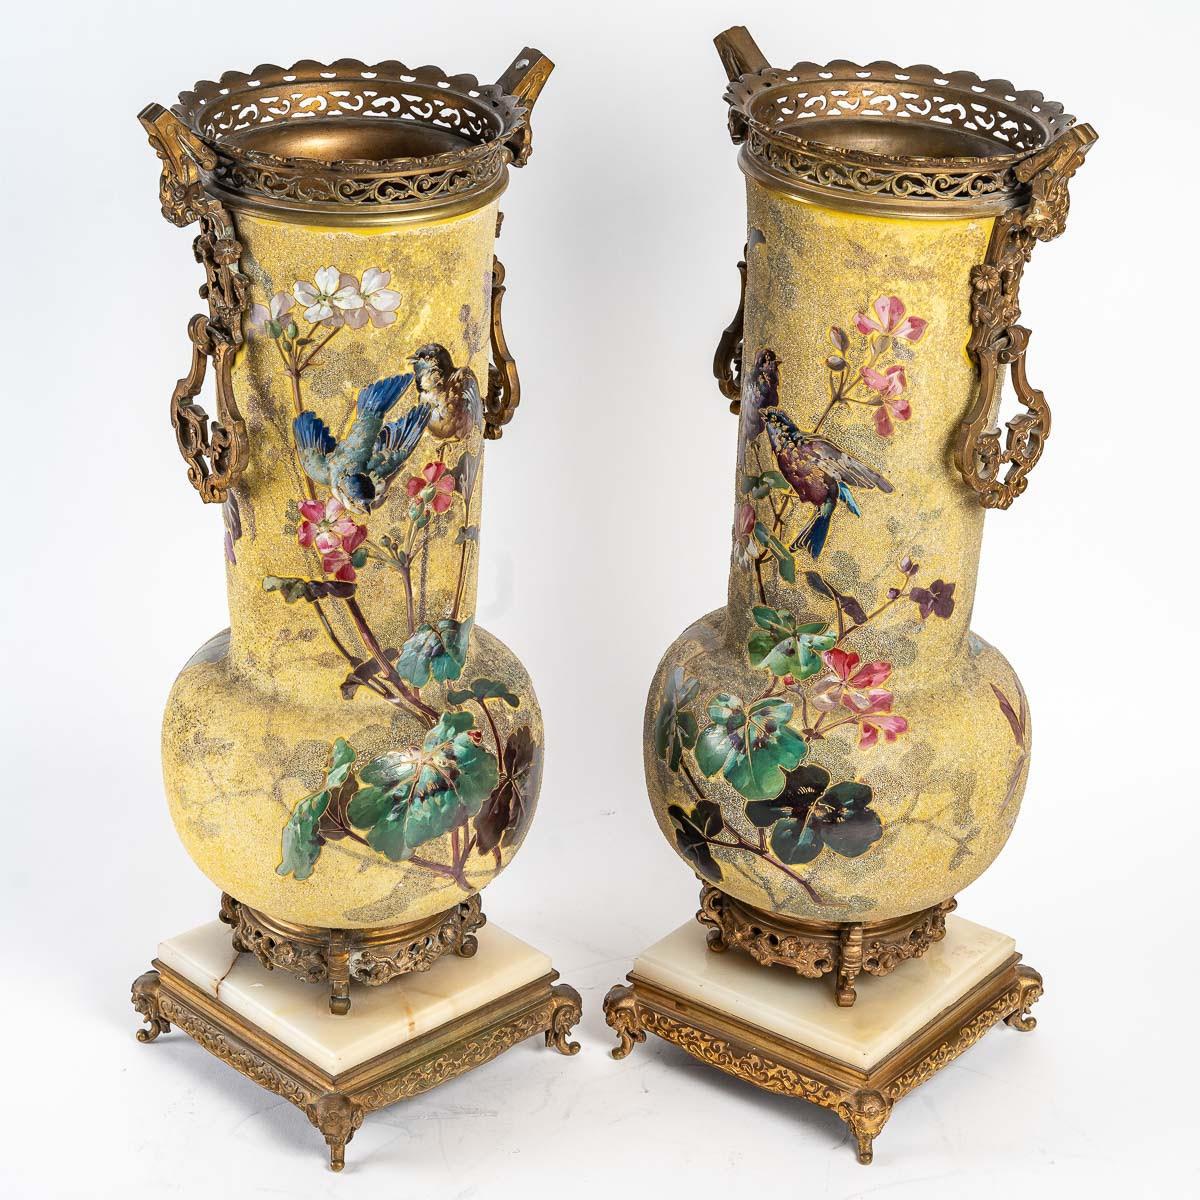 Pair of Enameled Porcelain, Gilt Bronze and Onyx Vases.

Pair of vases in the Théodore Deck taste in enameled porcelain, original gilt bronze mounting, onyx plaque on the base, late 19th century, Napoleon III period, large